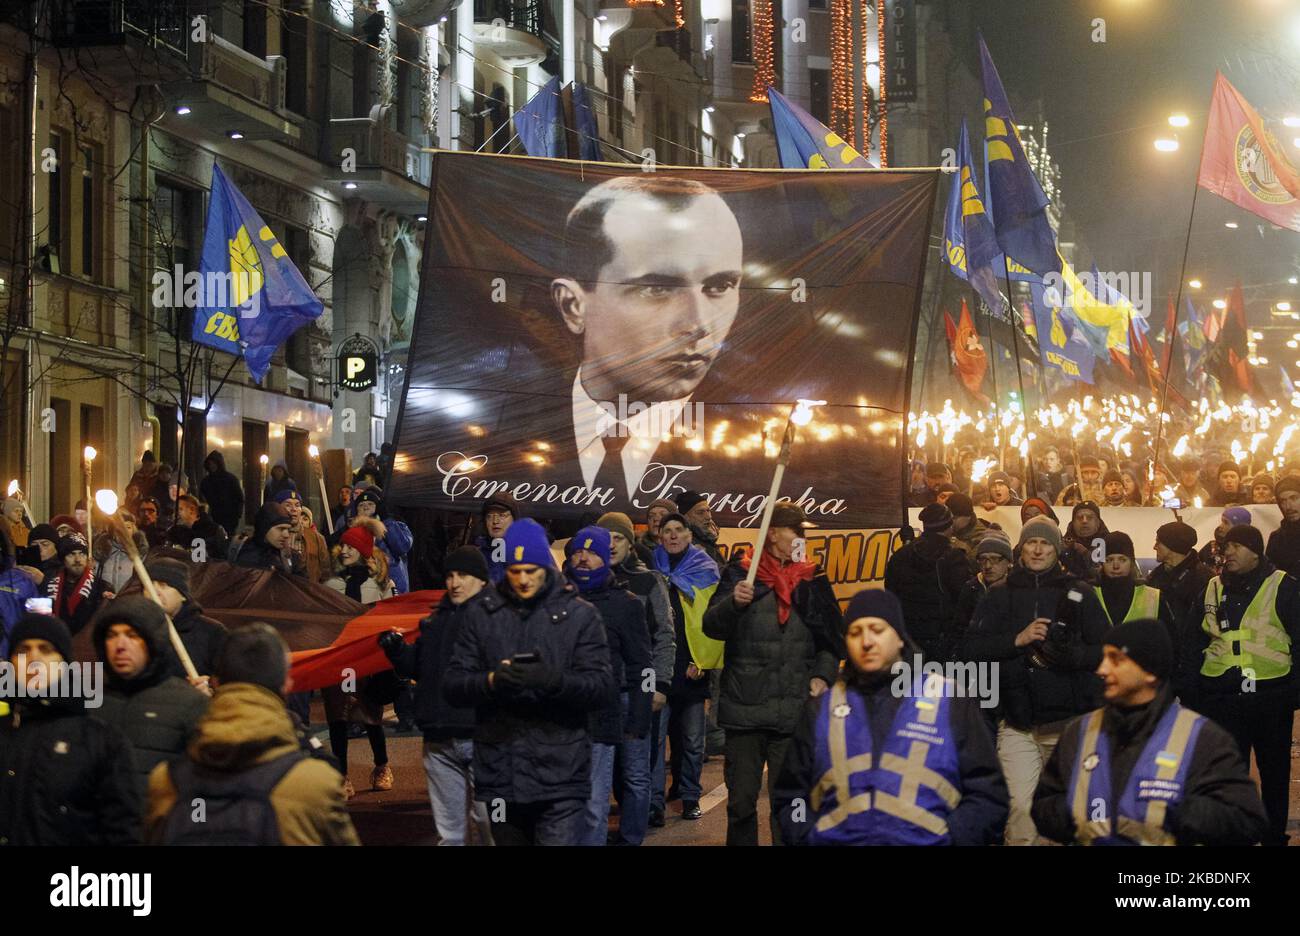 Ukrainians carry a banner with Stepan Bandera portrait during a torchlight procession dedicated to the 111th of Stepan Bandera birthday in center of Kyiv, Ukraine, on 1 January 2020. Members and supporters of 'Svoboda' ('Freedom') nationalistic party attended the torch march to mark leader and ideologist of Ukrainian national movement Stepan Bandera birthday. (Photo by STR/NurPhoto) Stock Photo